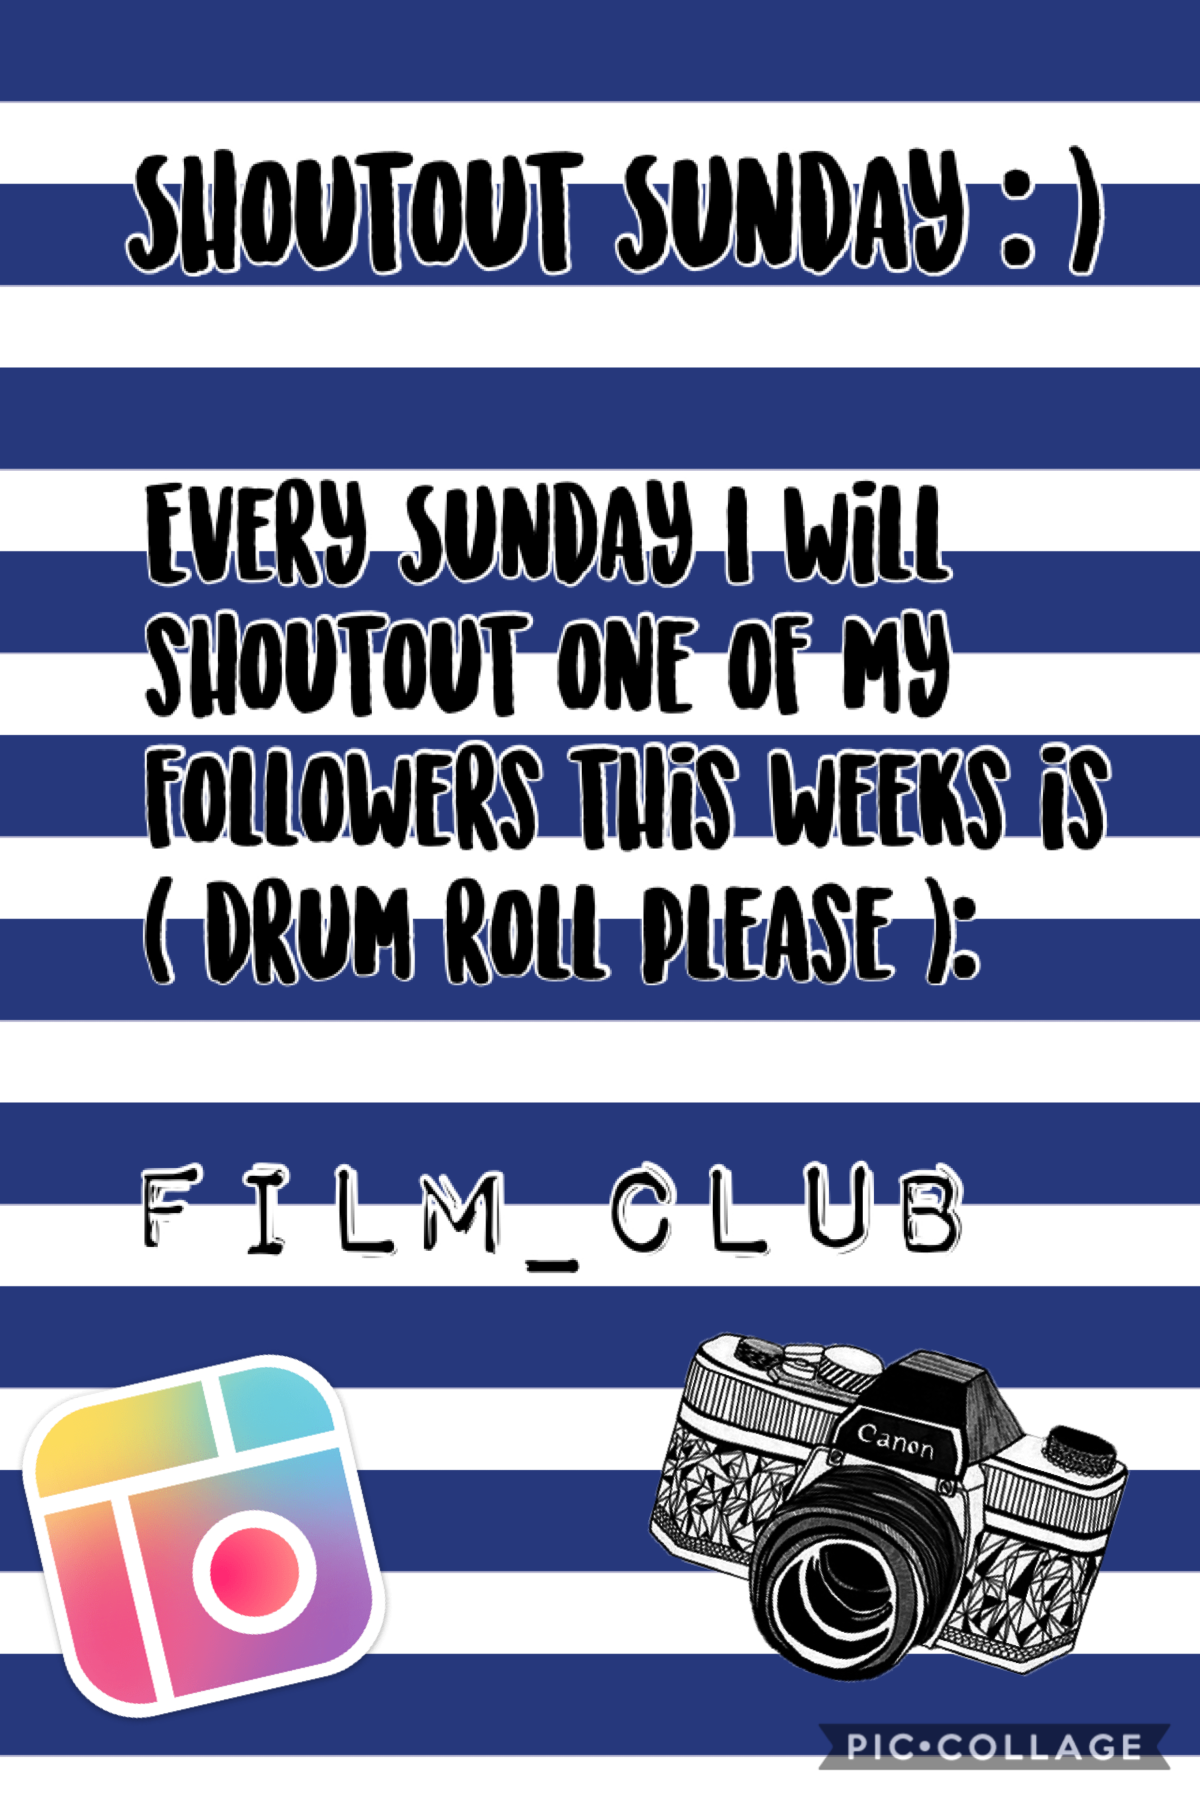 🐙tap🐙

Shout out Sunday:

Film_Club